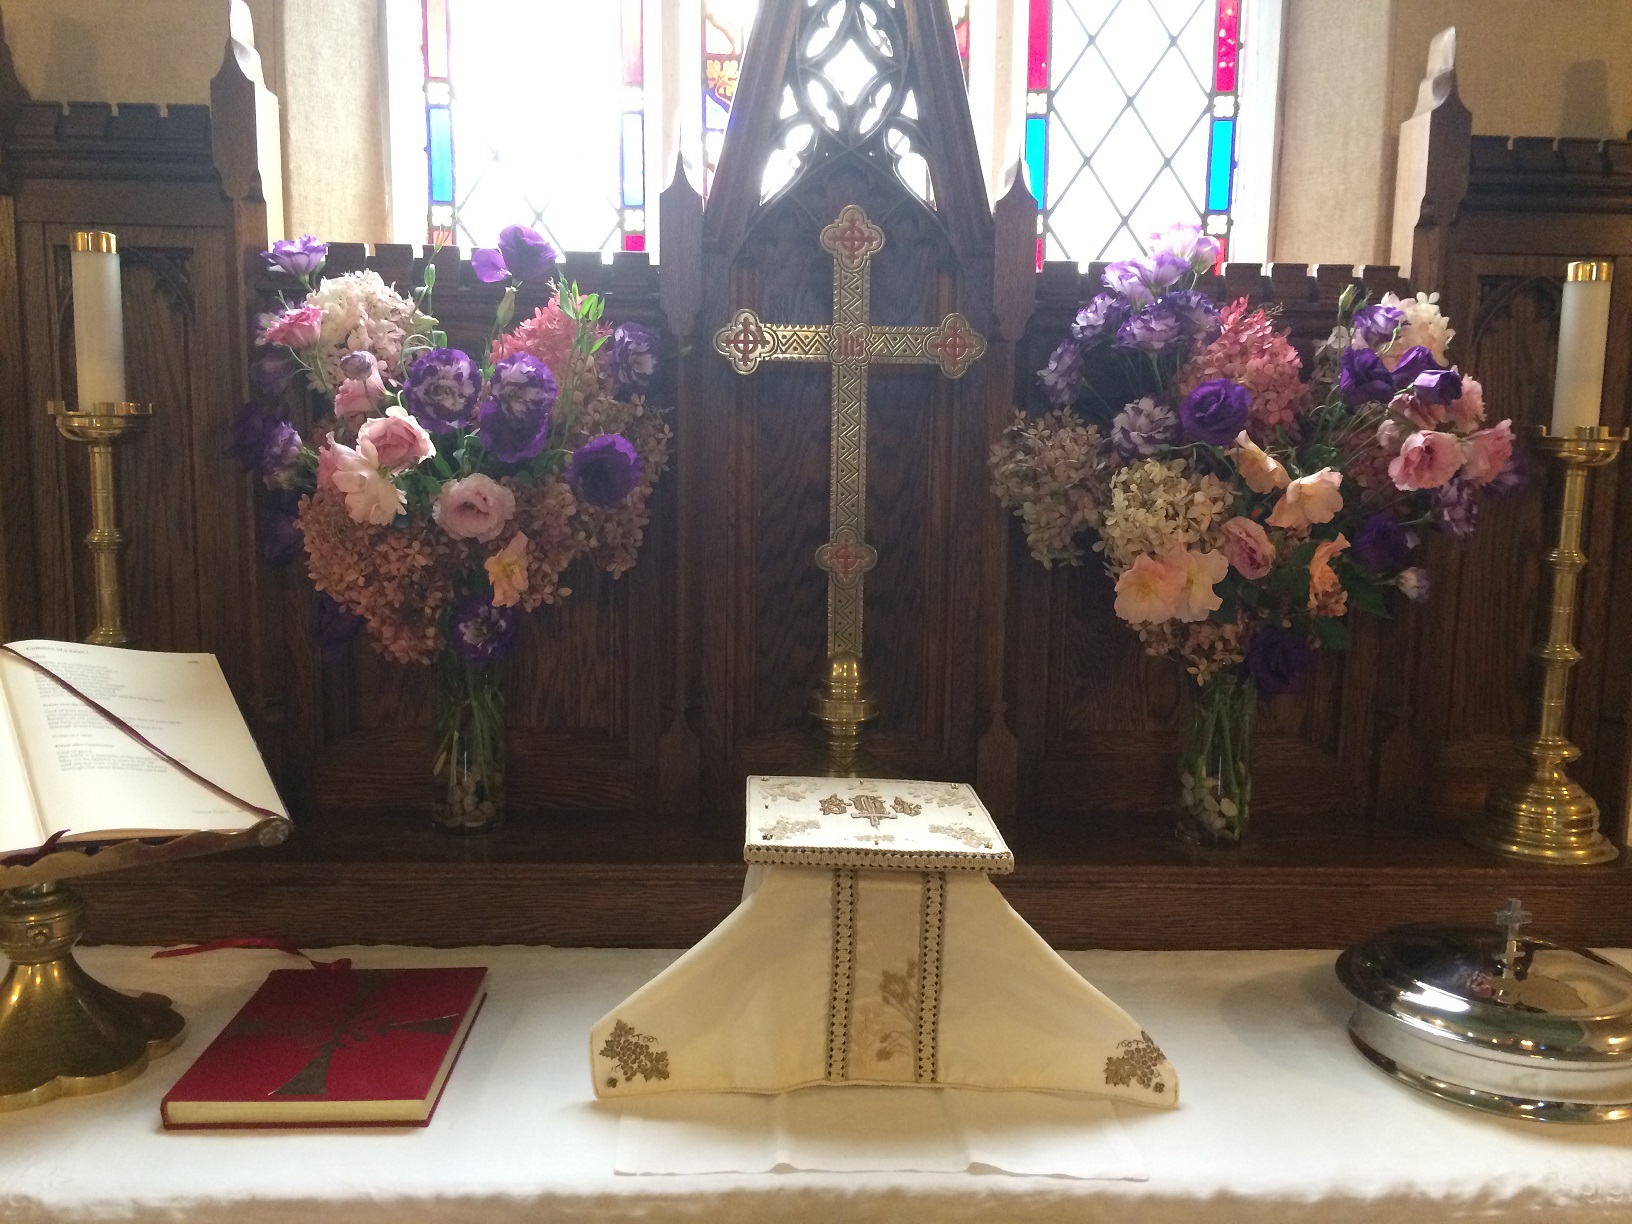 Flowers on the altar Sunday, October 1st.